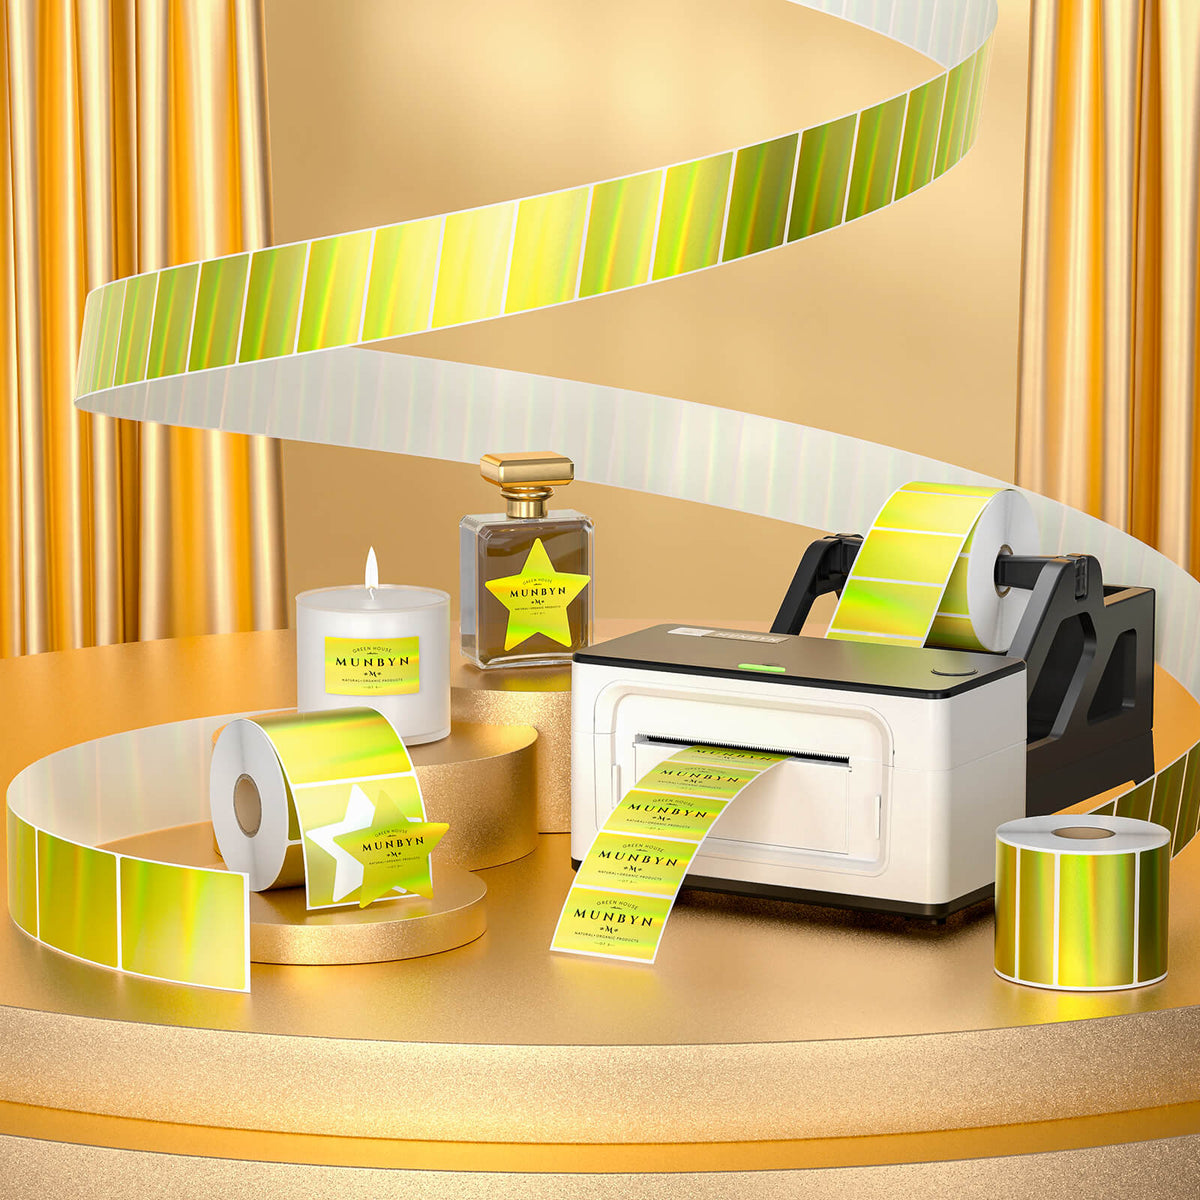 MUNBYN's versatile gold holographic thermal labels are perfect for a variety of purposes.